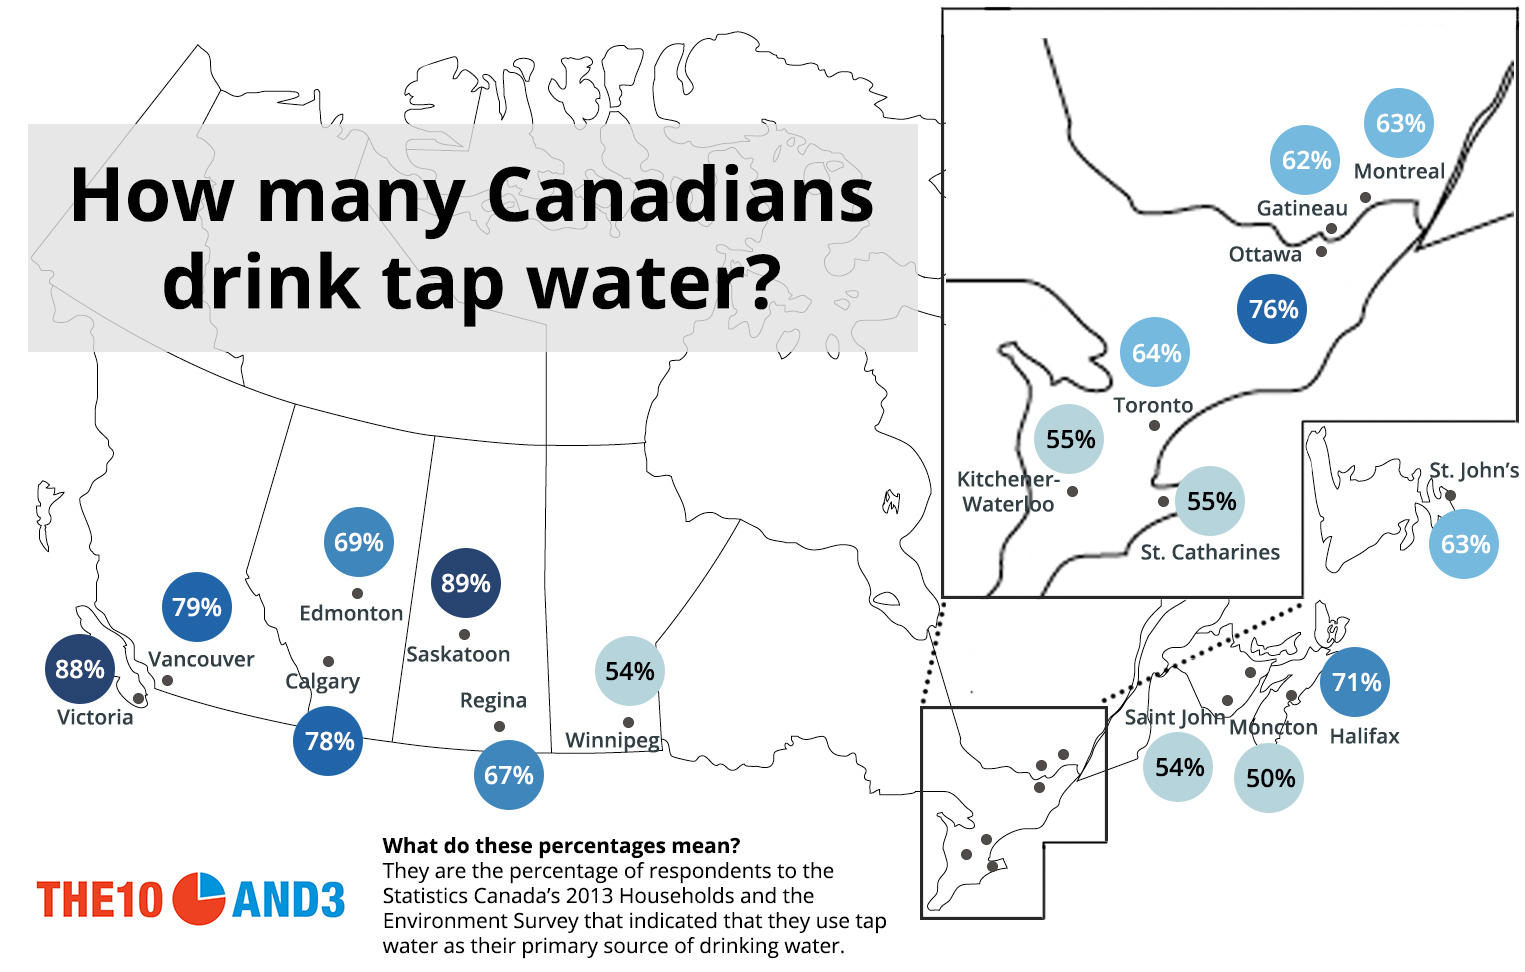 How many Canadians drink tap water?